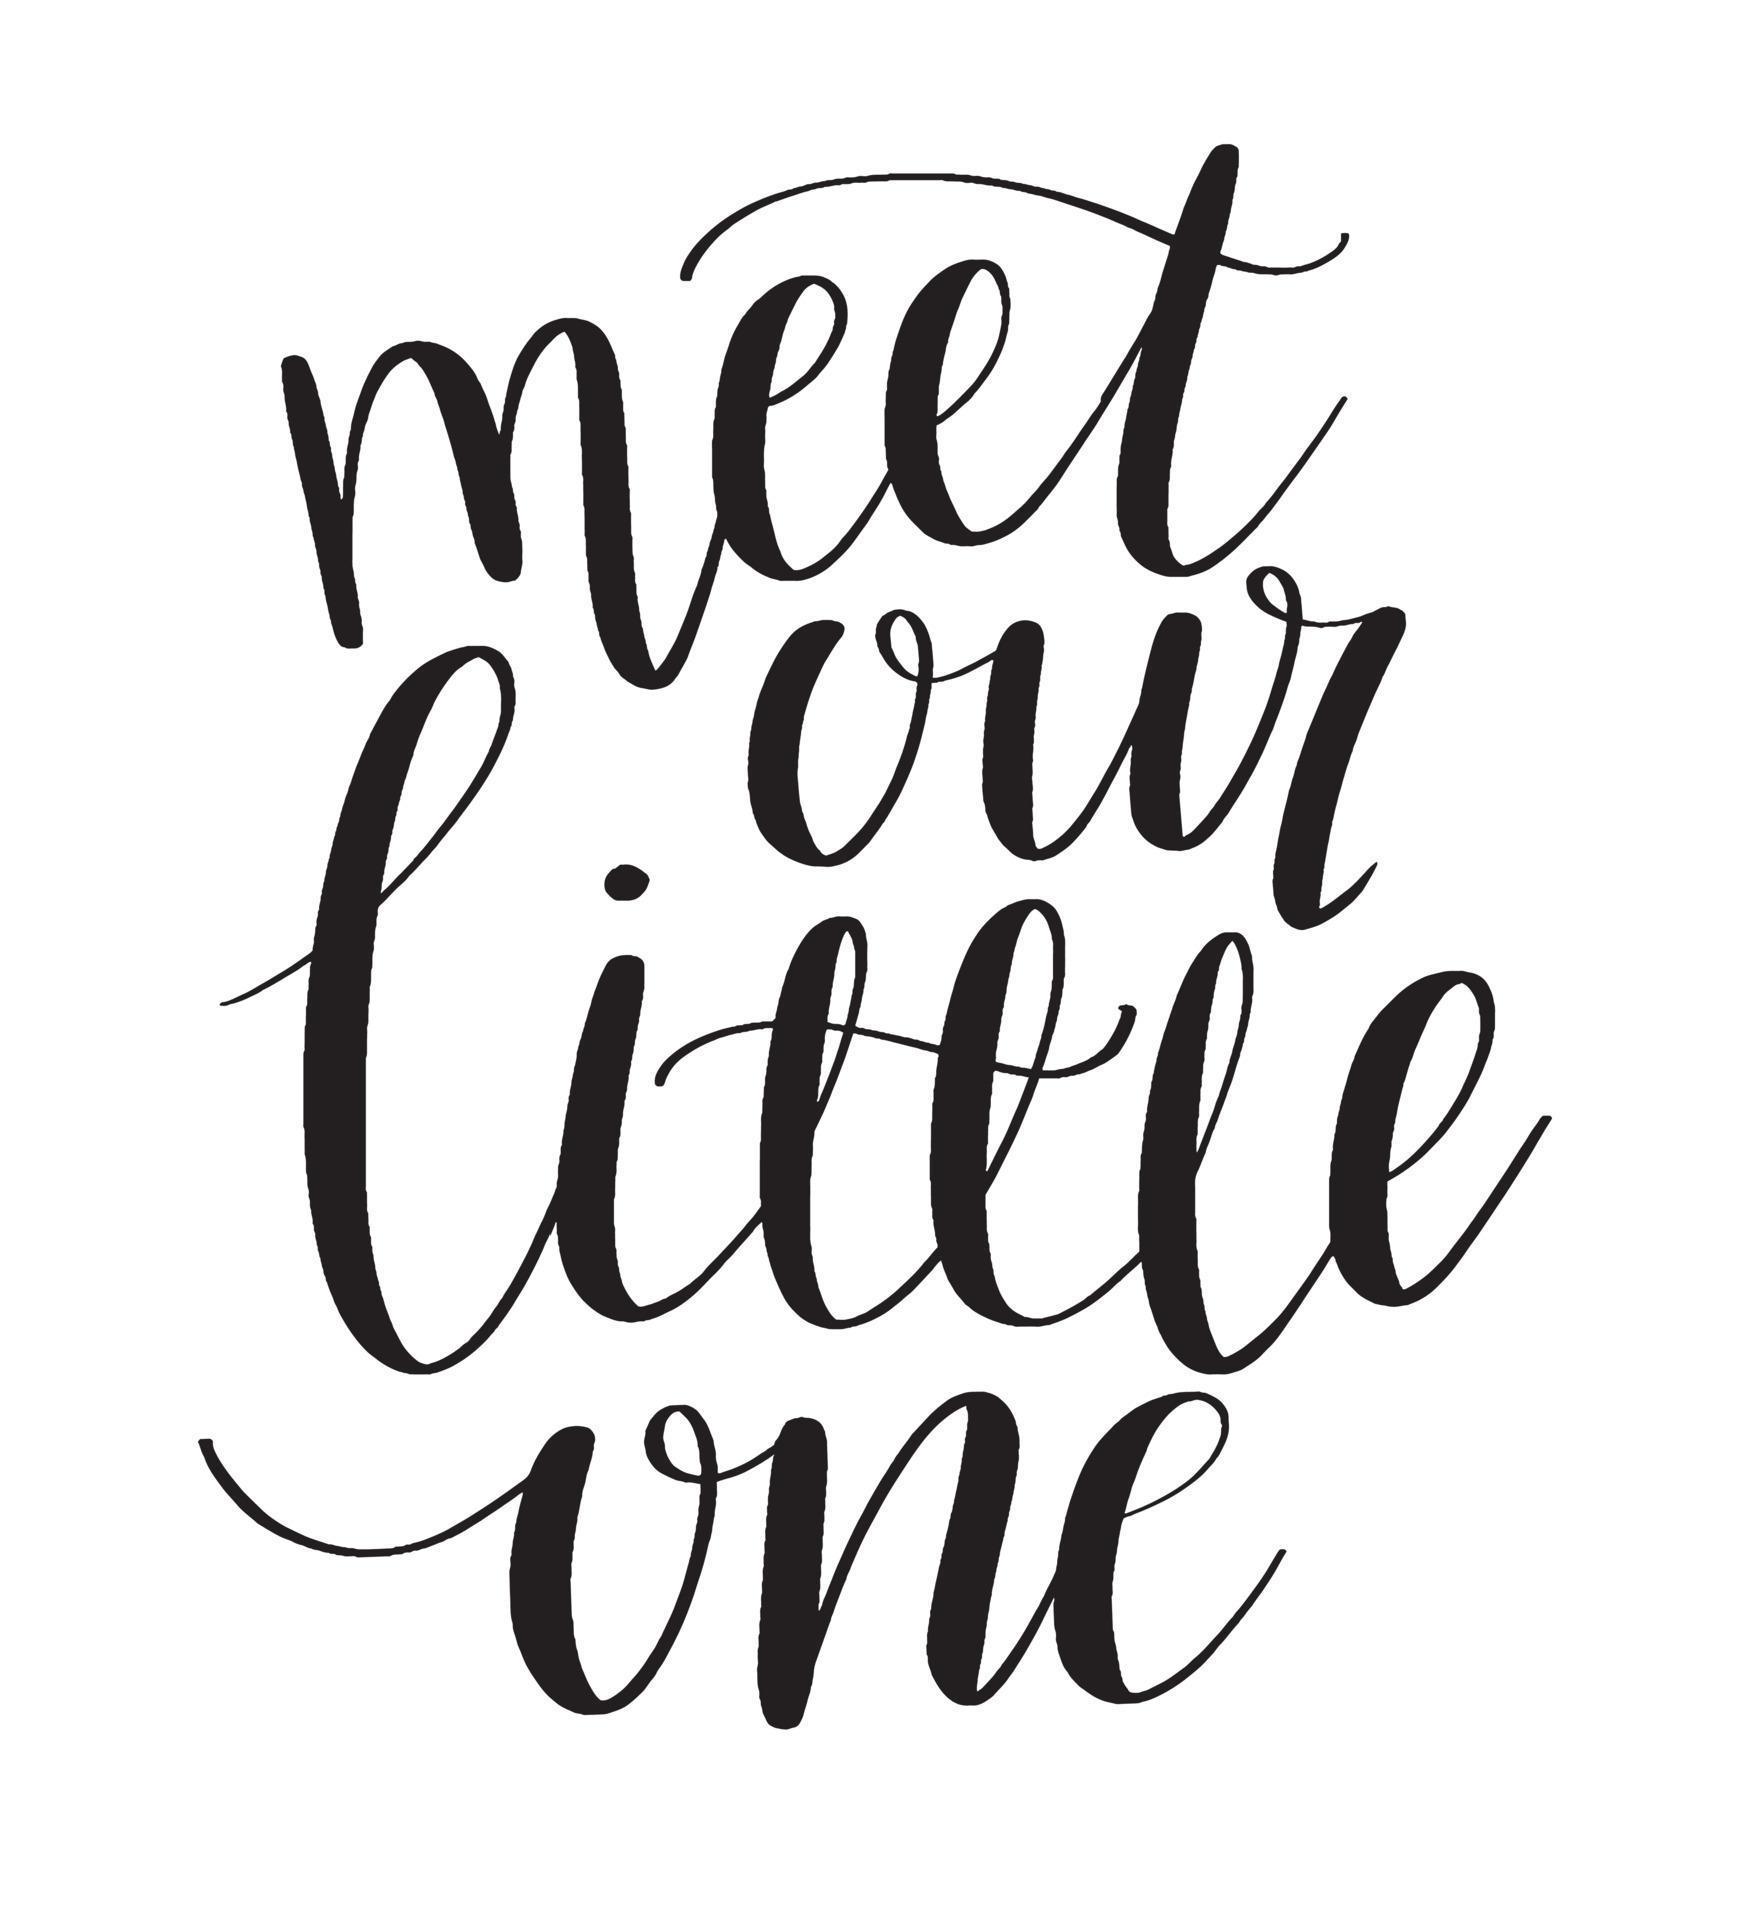 Meet our little one modern calligraphy. Hand lettering phrase, quote